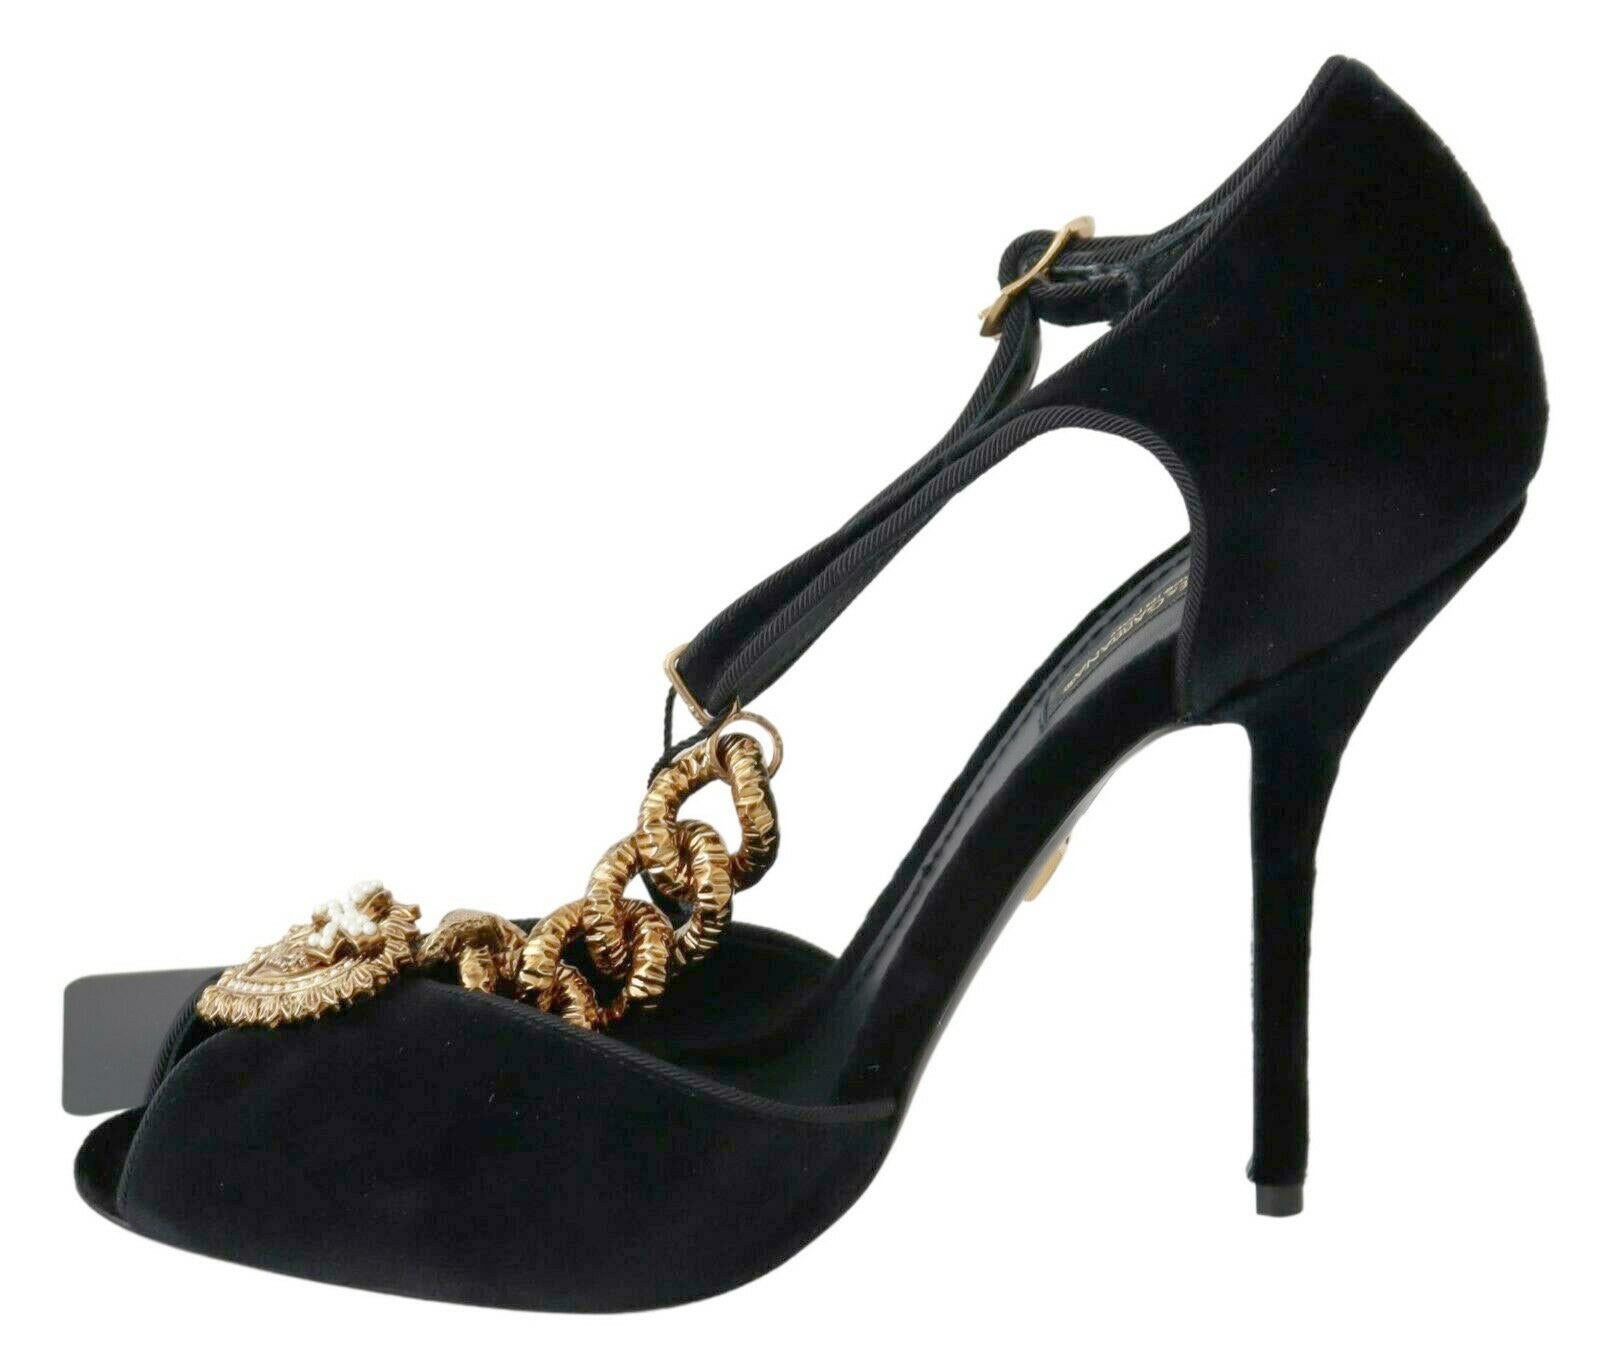 Gorgeous brand new with tags, 100% Authentic Dolce & Gabbana Black Devotion pumps. A laconic outfit will only benefit from the decoration made in the jewelry technique in the form of a large twisted chain and encrusted with miniature pearls of the